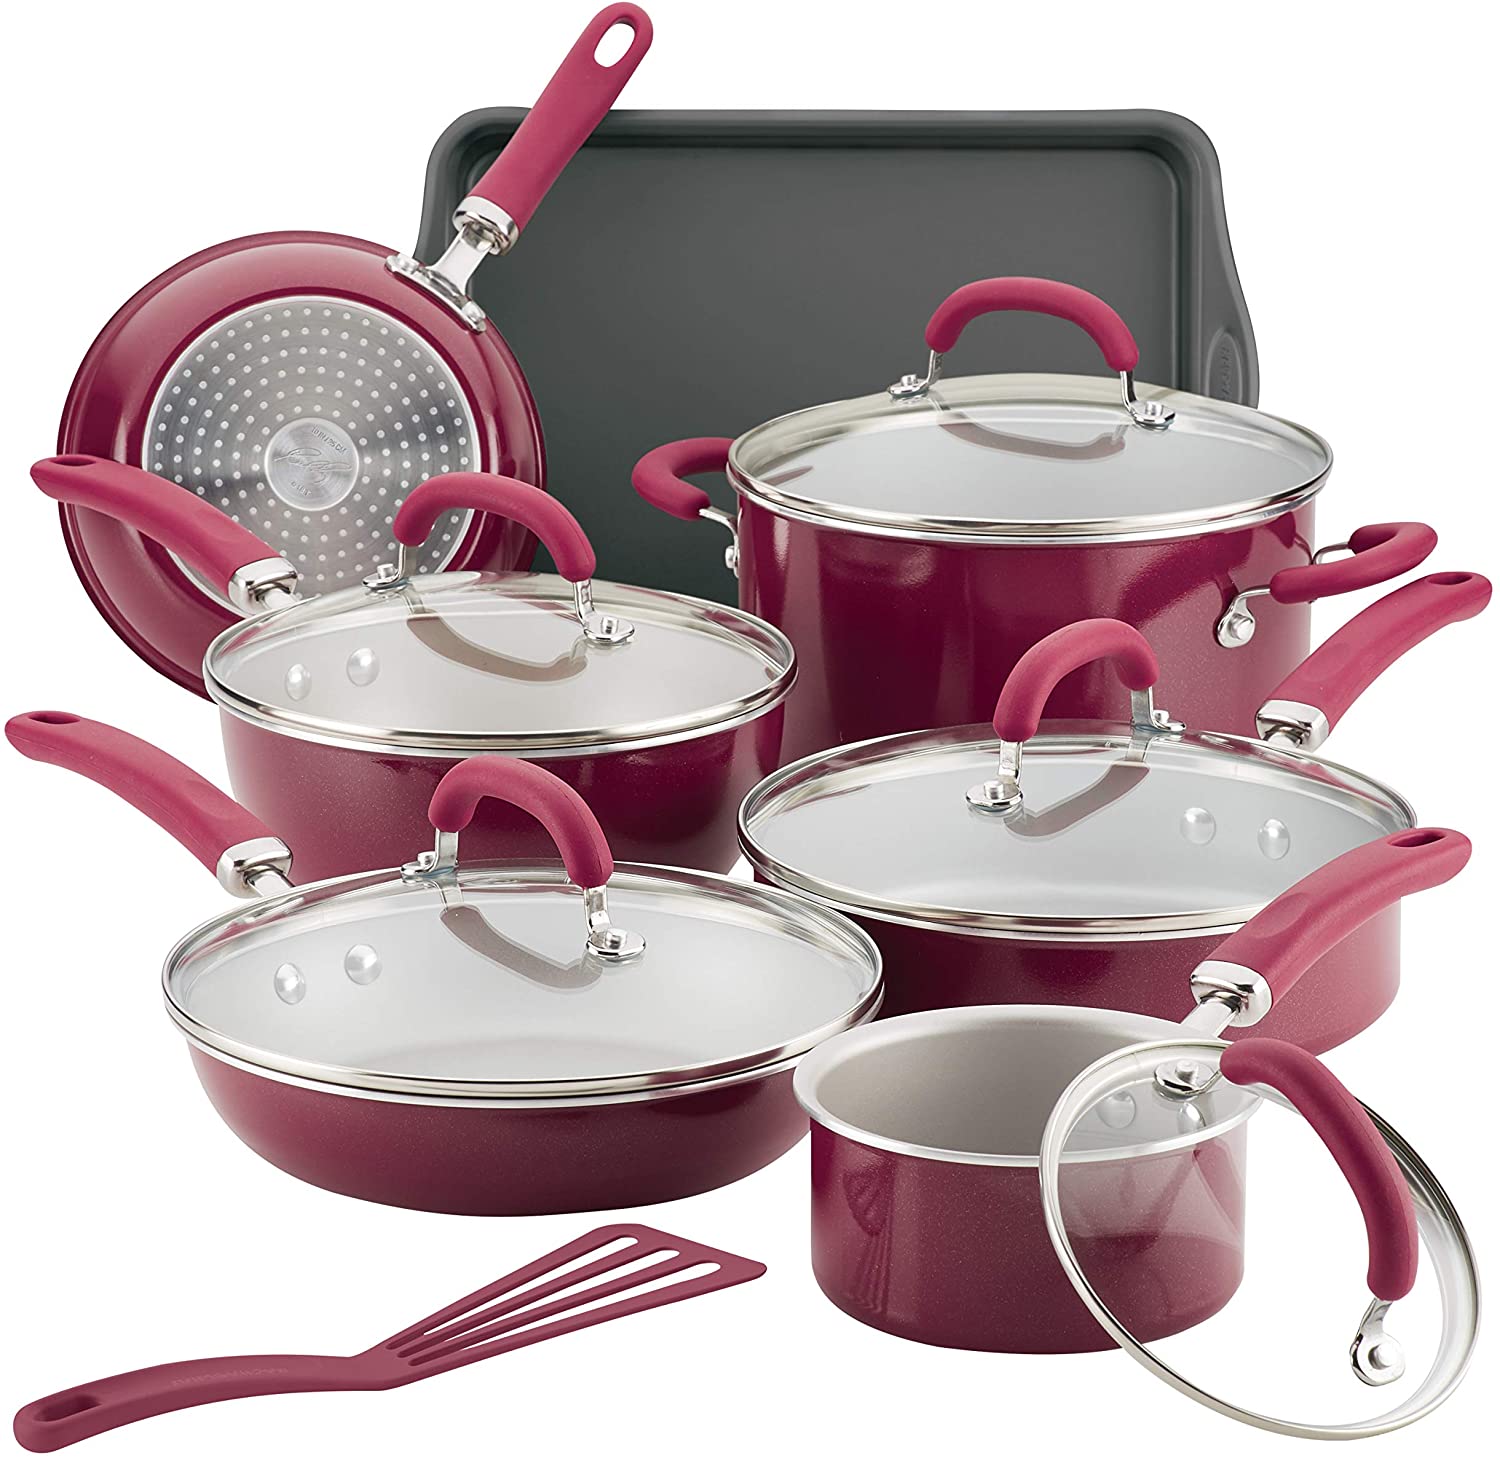 Rachael Ray Create Delicious Nonstick Cookware Pots and Pans Set